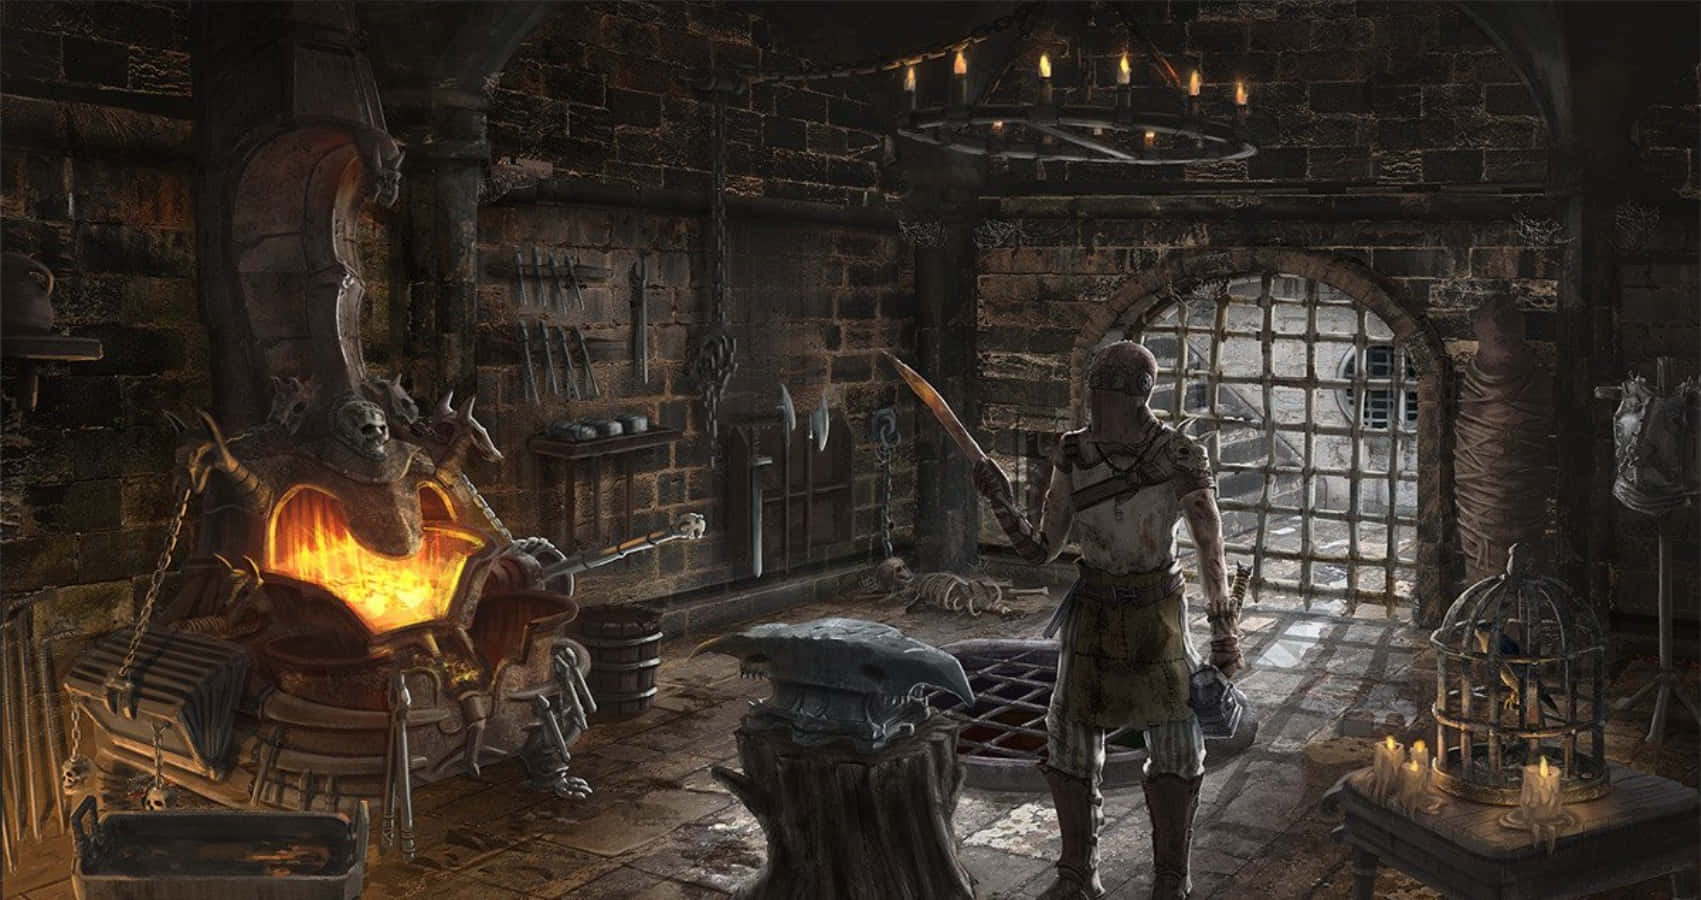 A blacksmith hard at work against a backdrop of fire and sparks Wallpaper